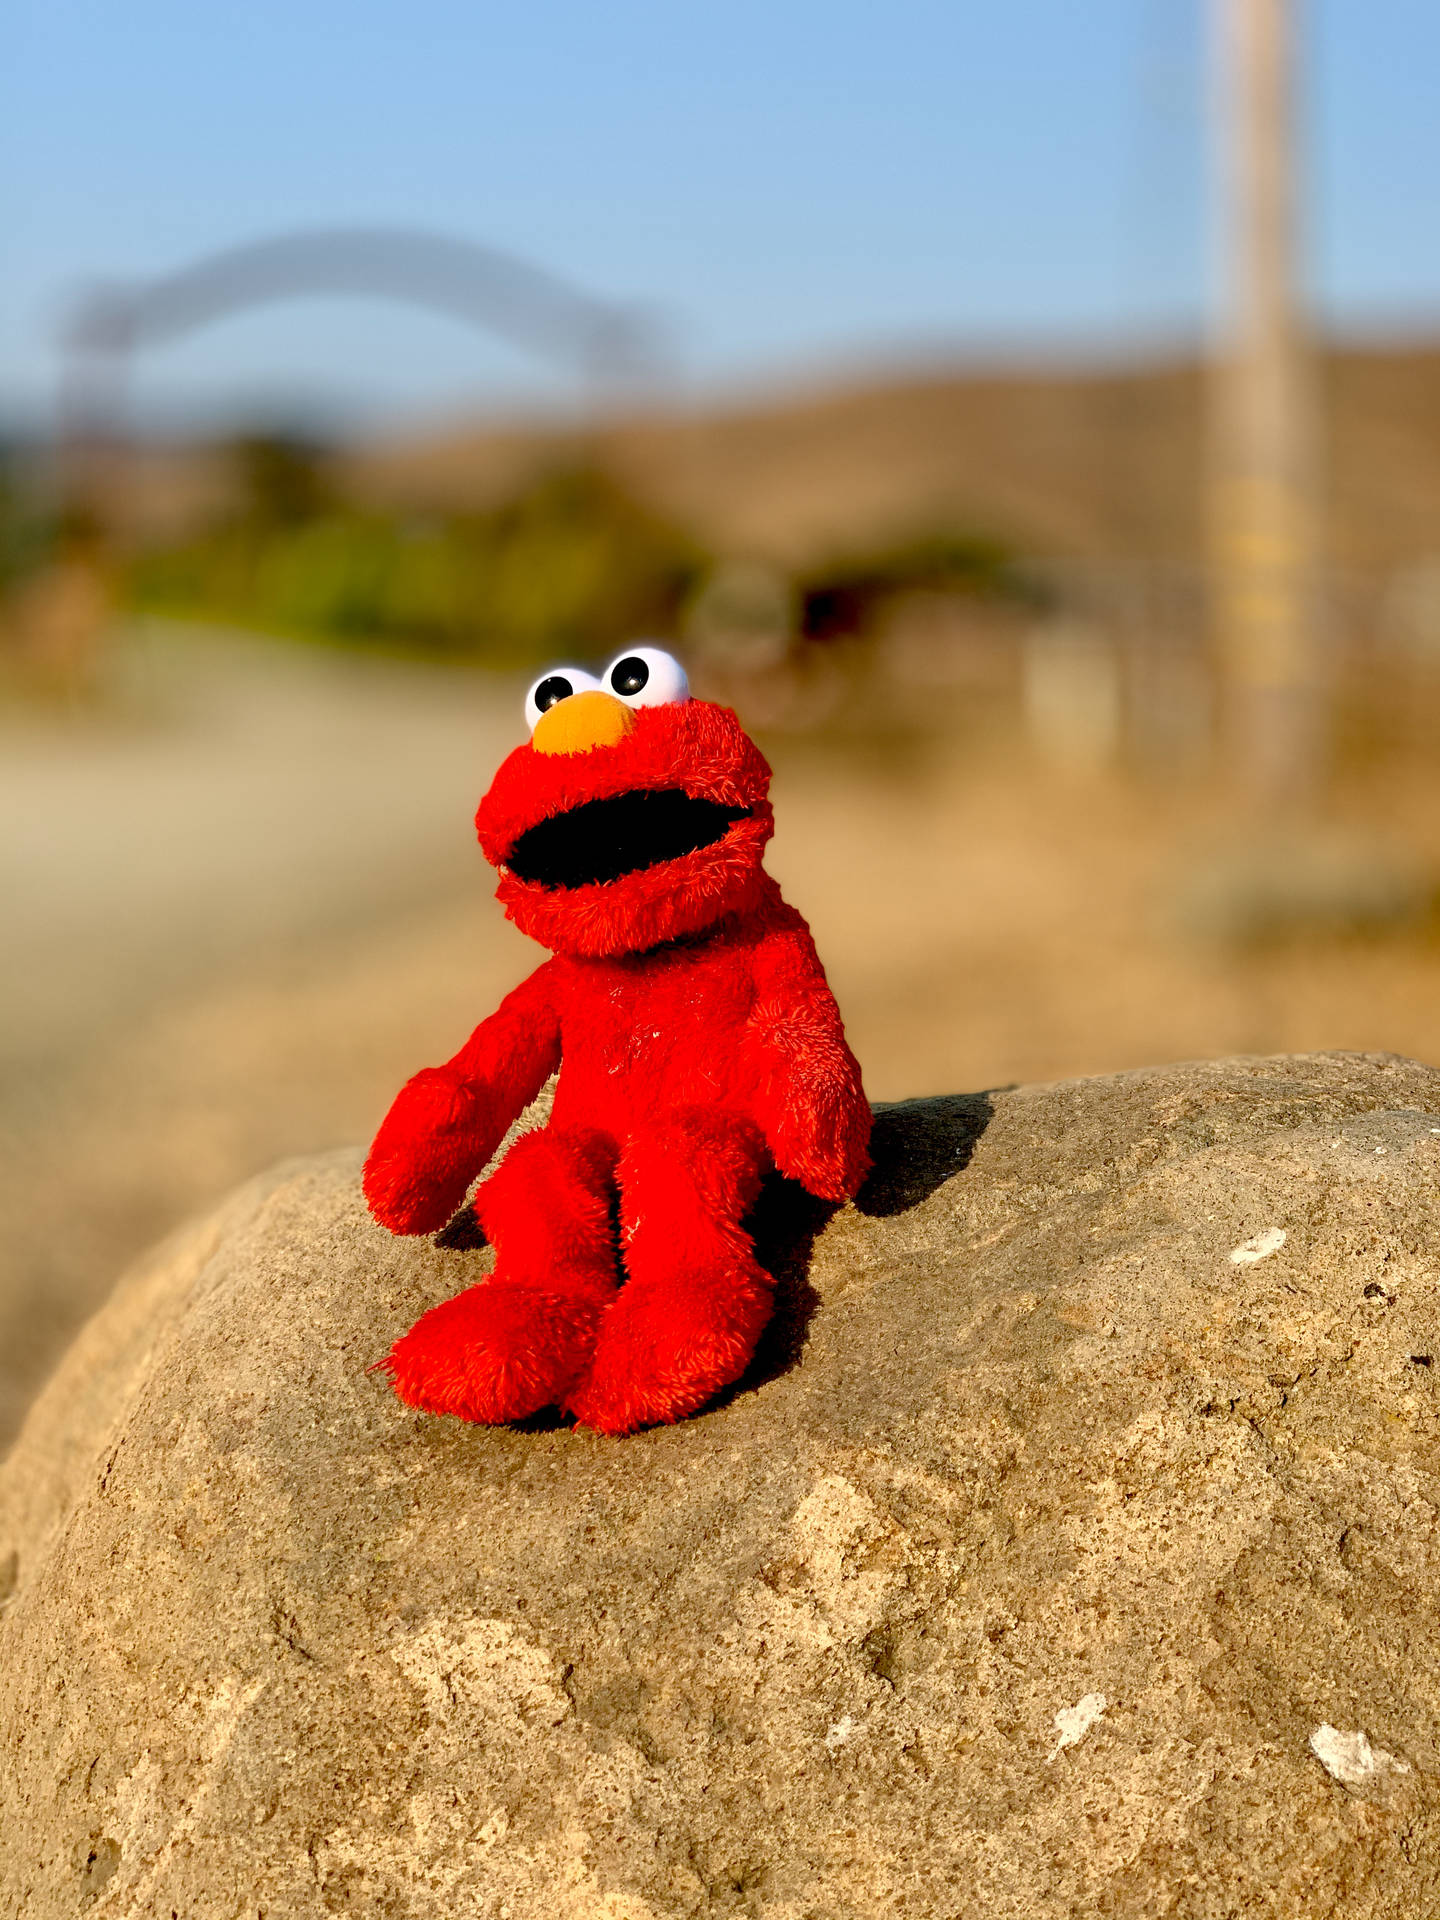 Elmo 3024X4032 Wallpaper and Background Image